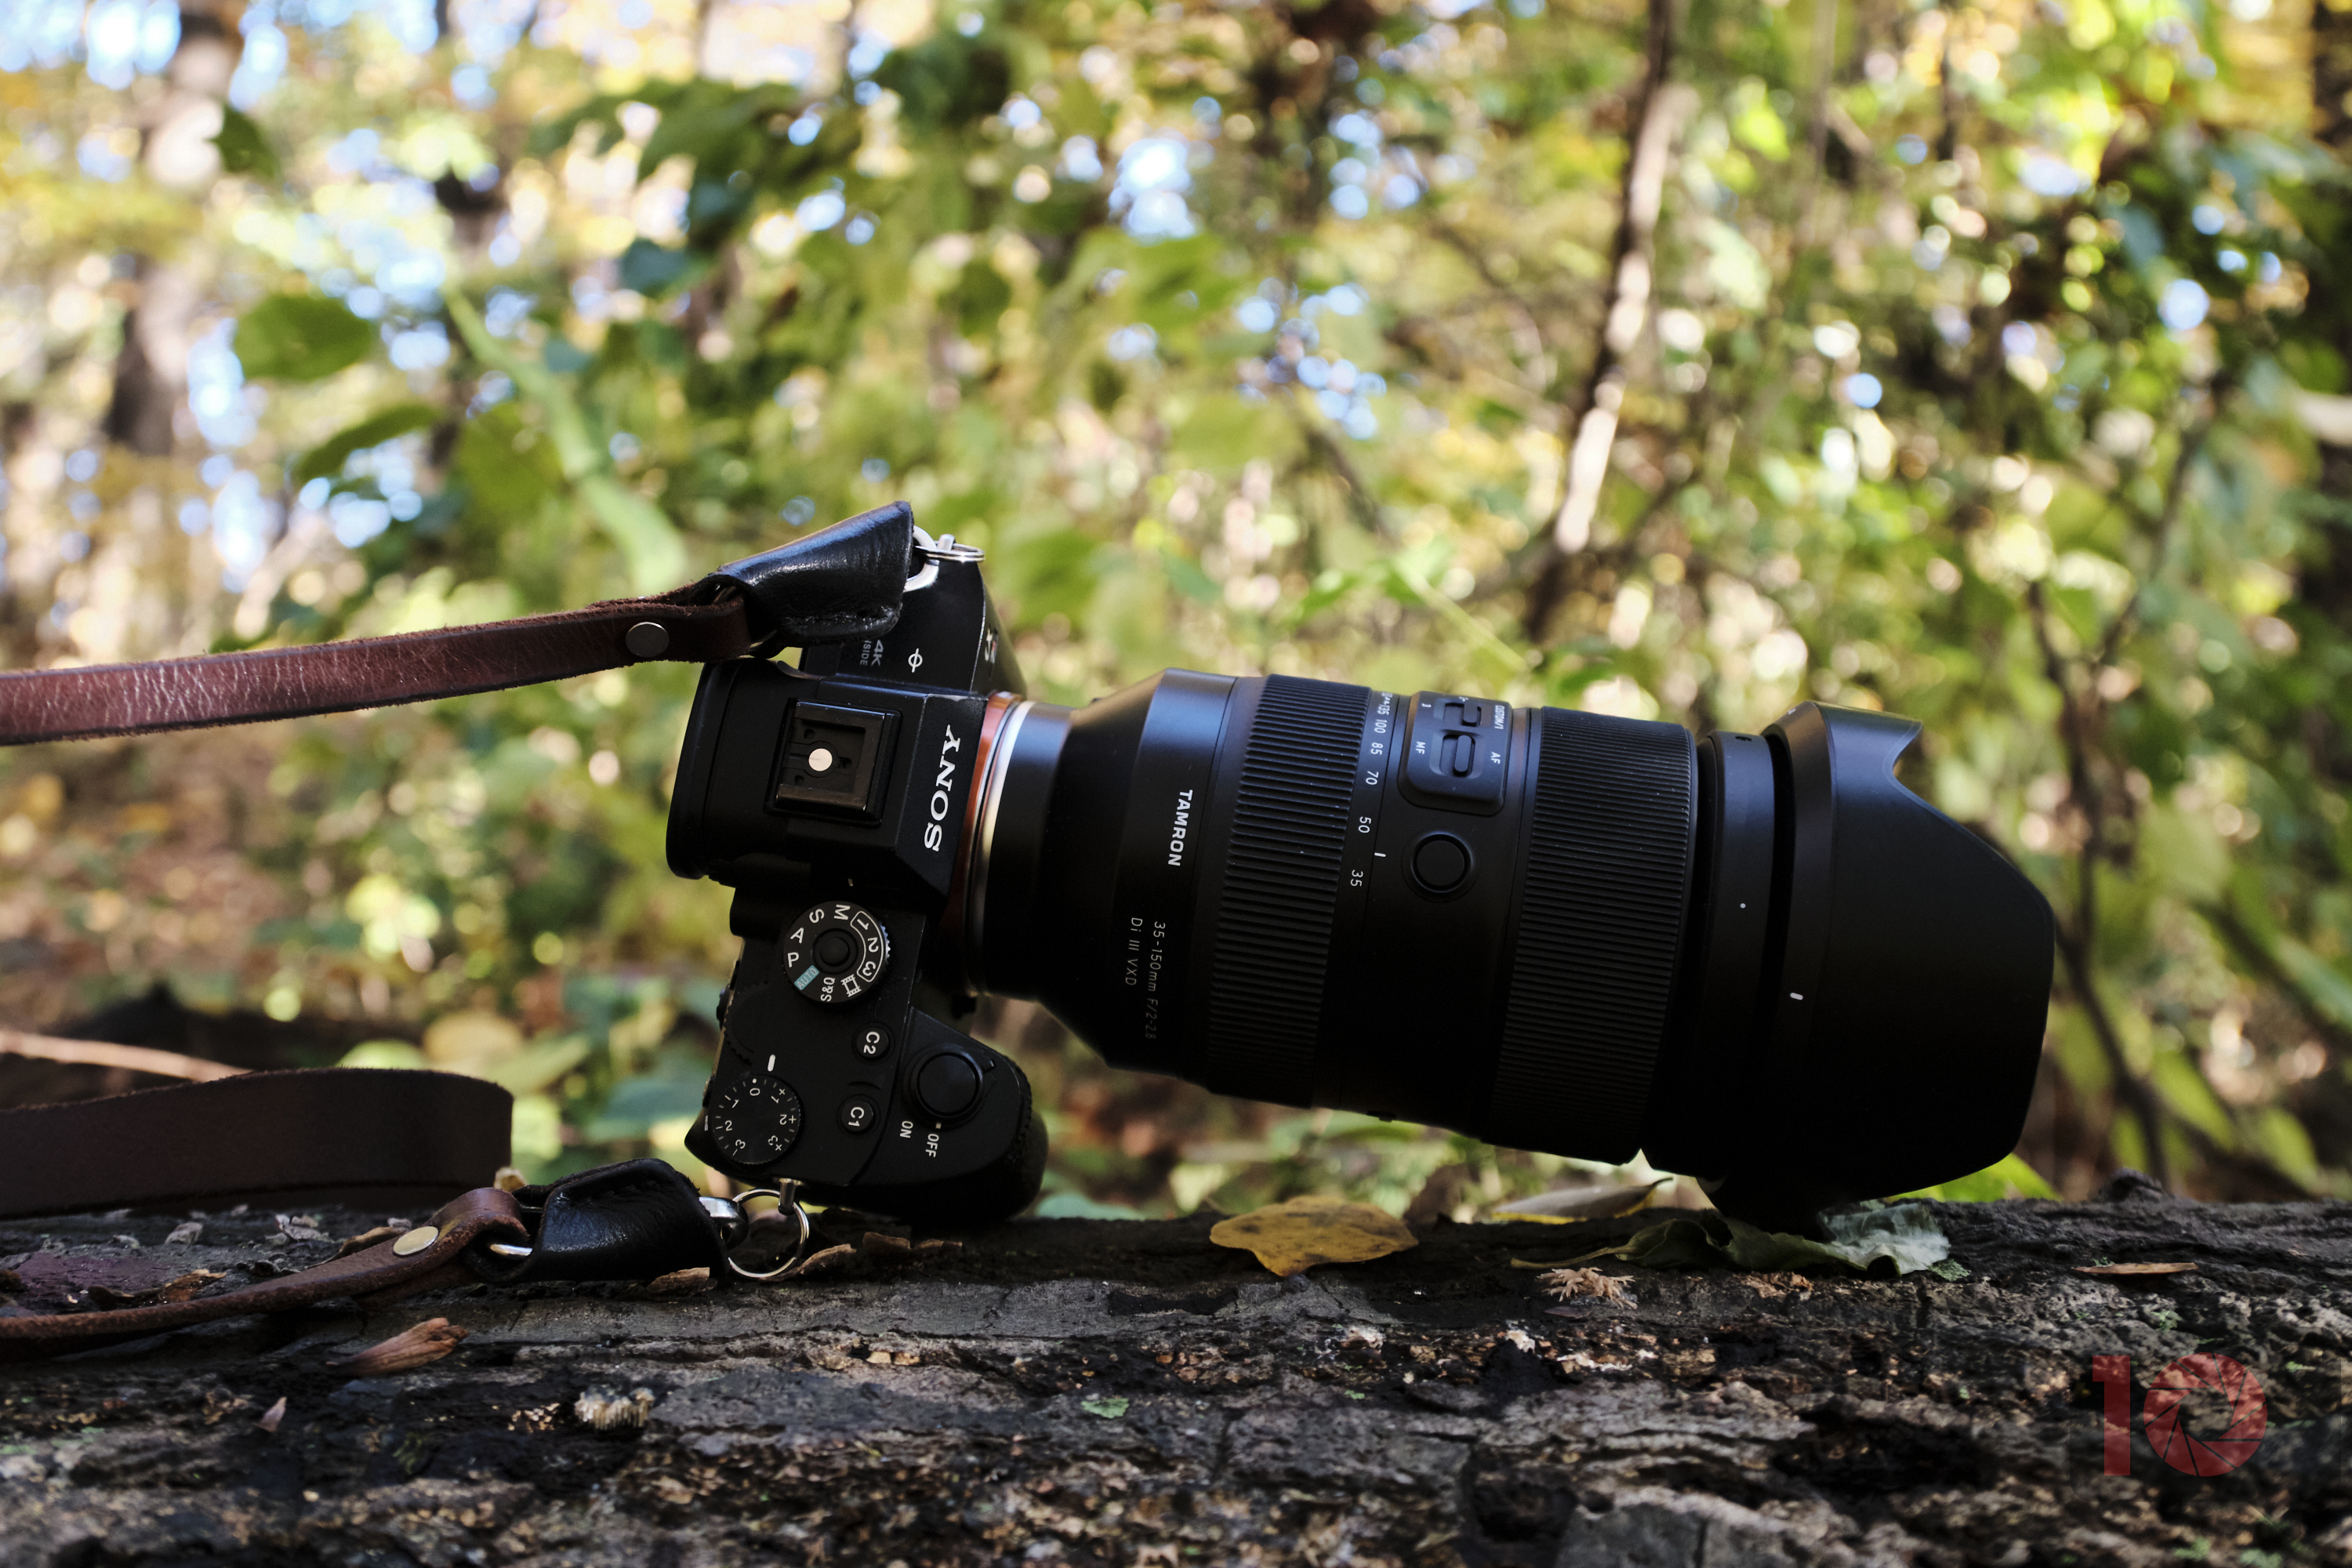 Chris Gampat The Phoblographer Tamron 28-75mm f2.8 G2 review product images 3.51-150s1600